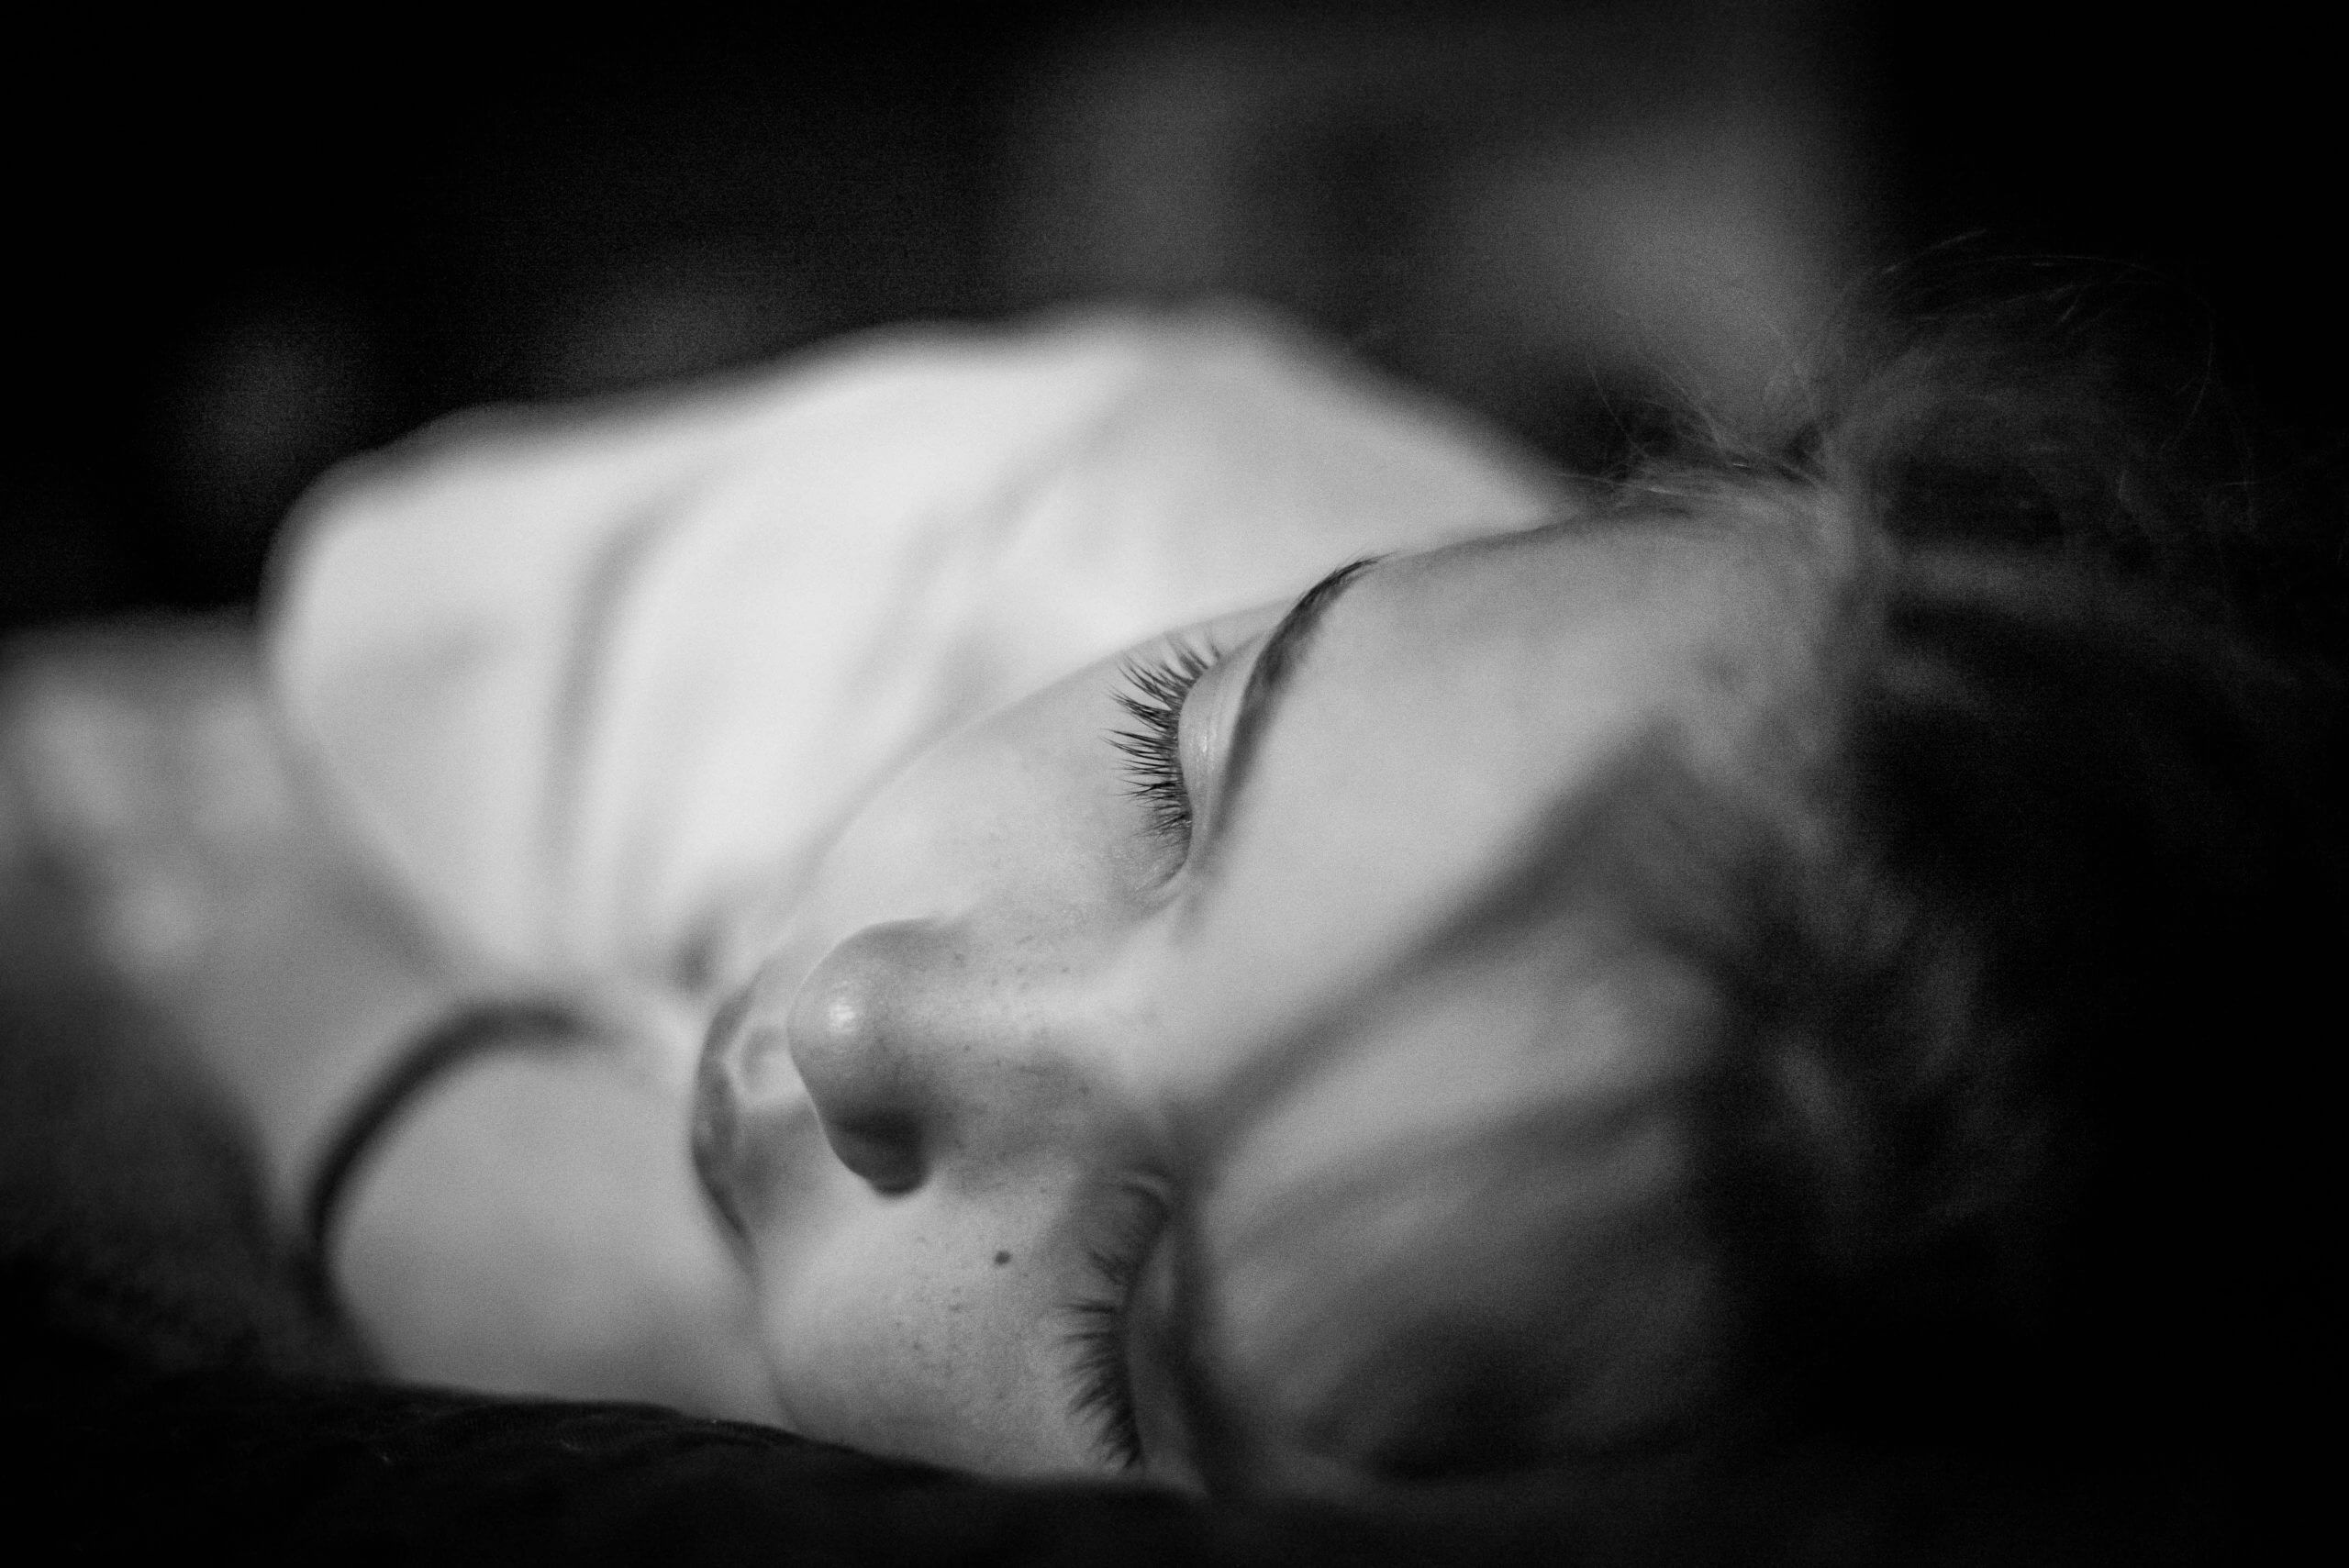 Black and white photo of a young girl sleeping on her left side taken from the perspective of the top of her head